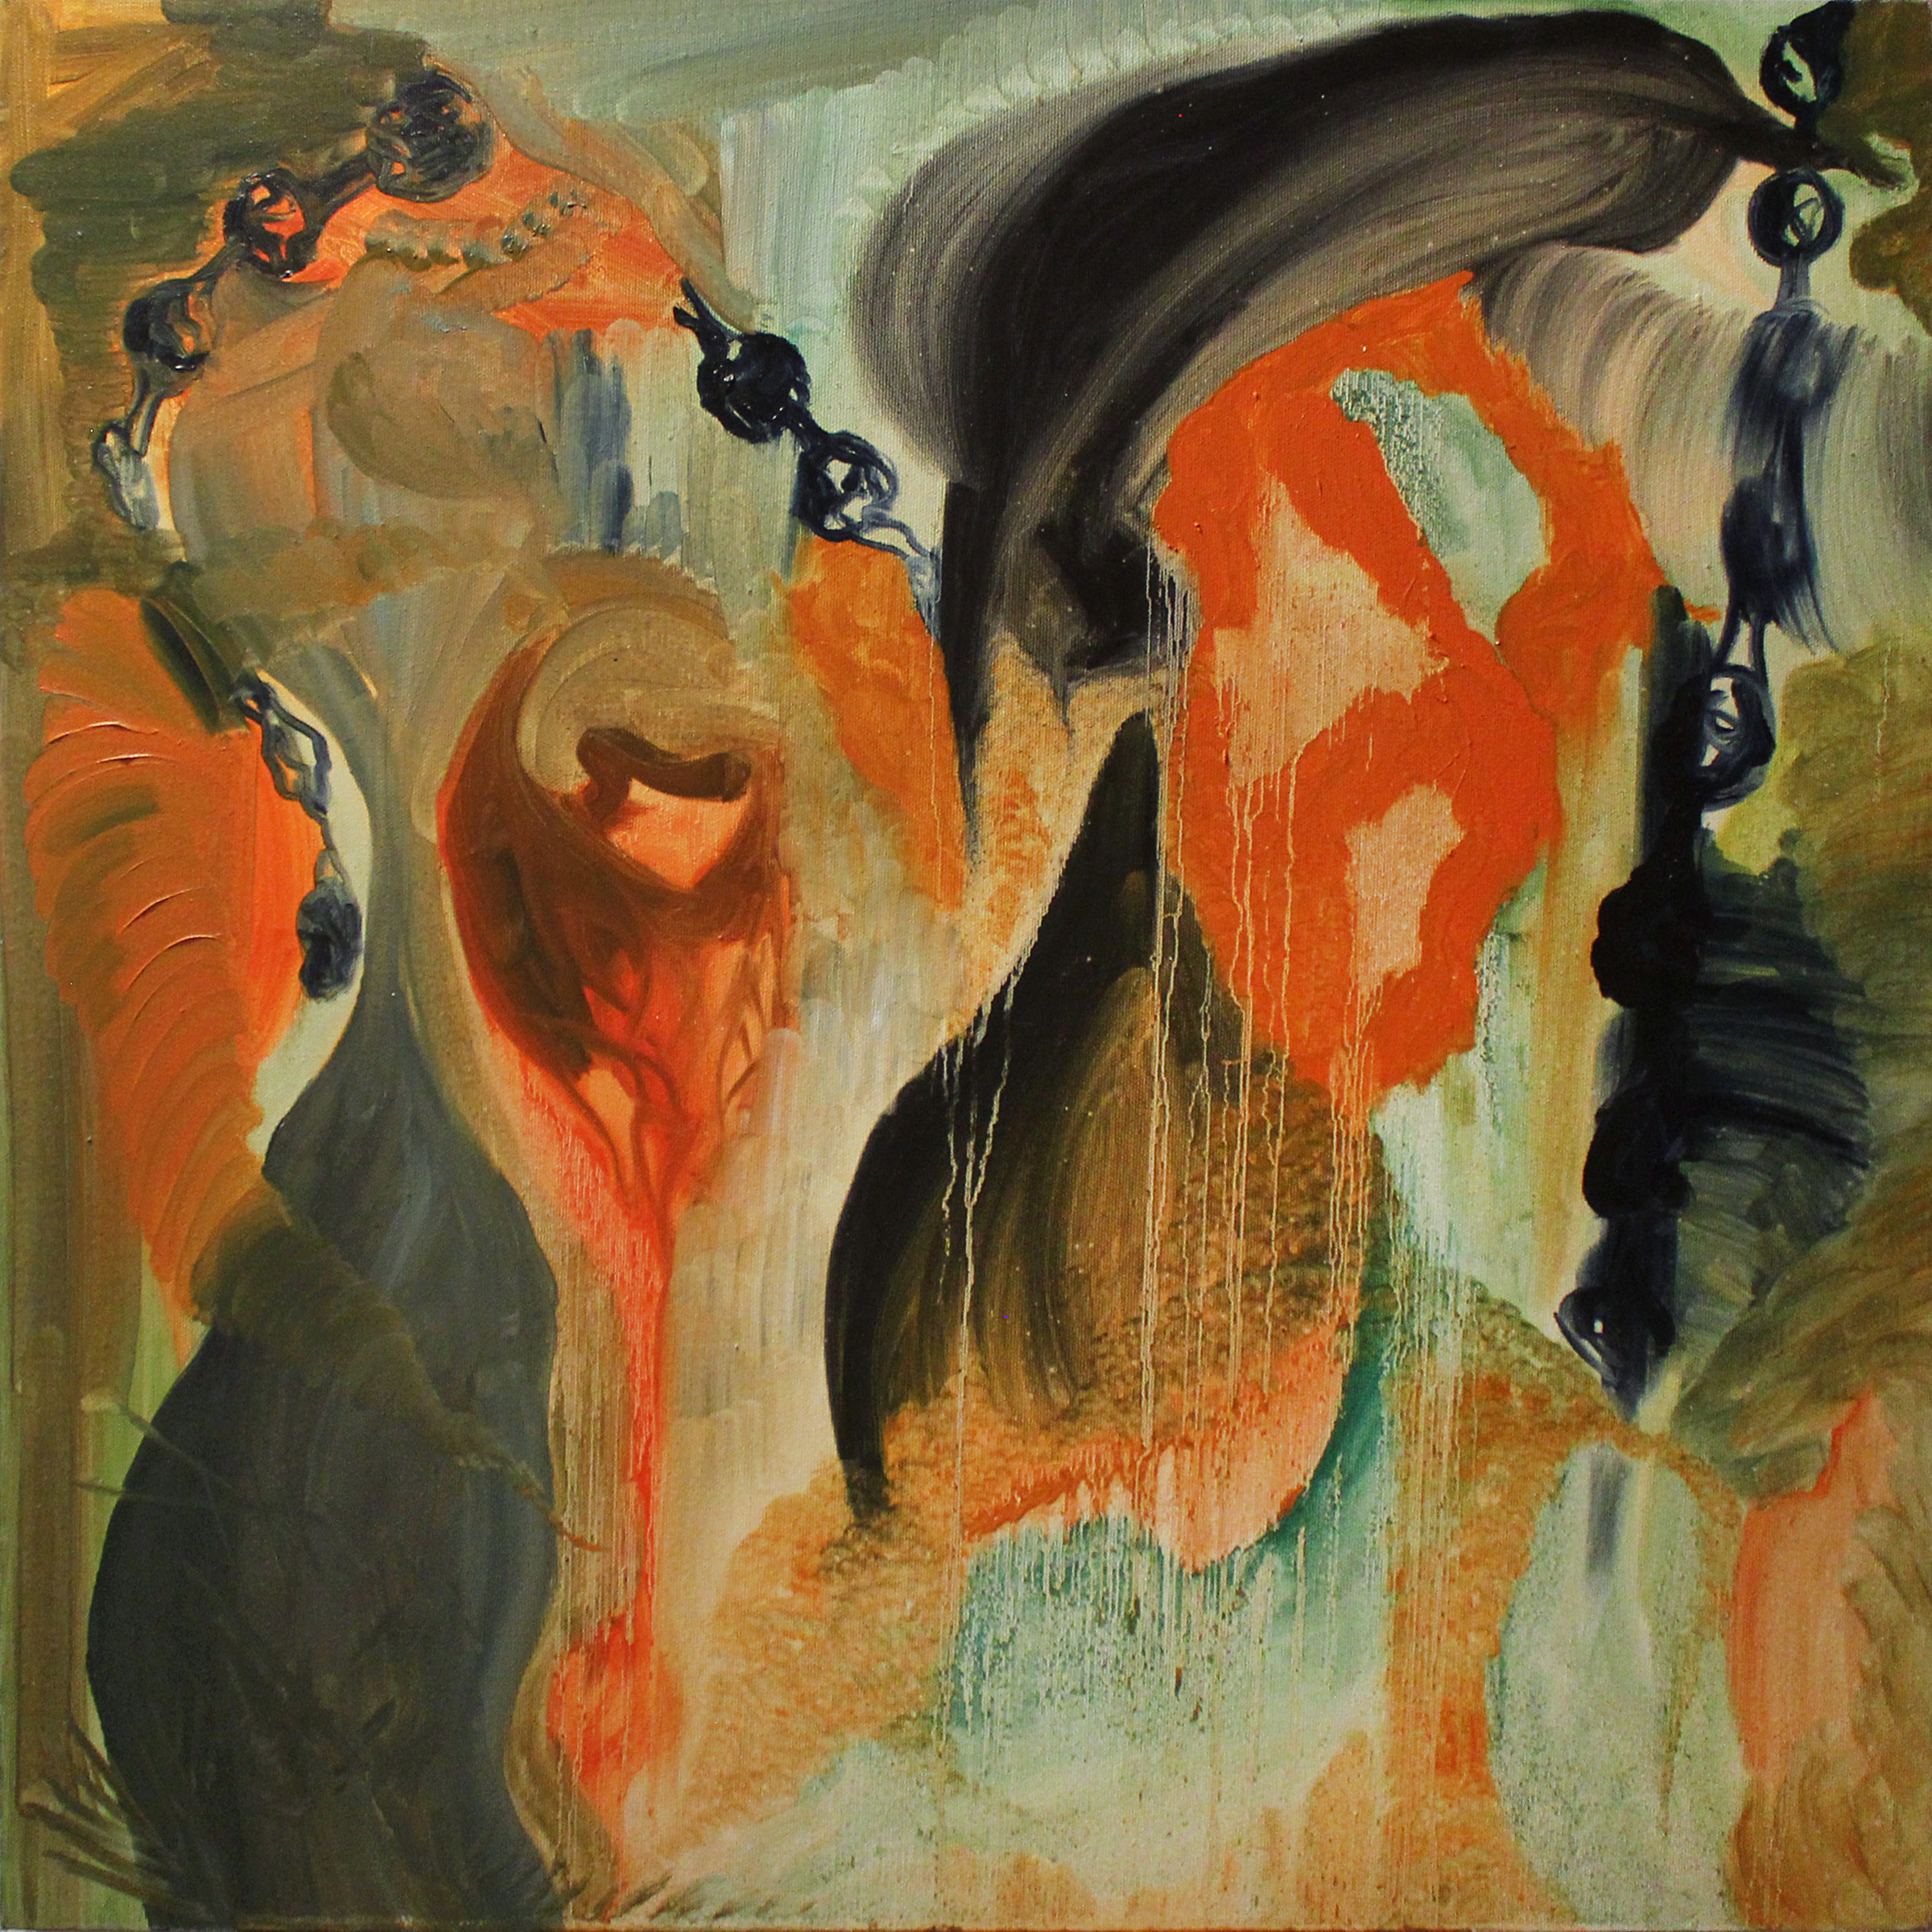 Passing Sounds, 2006, 30 x 30", oil on canvas